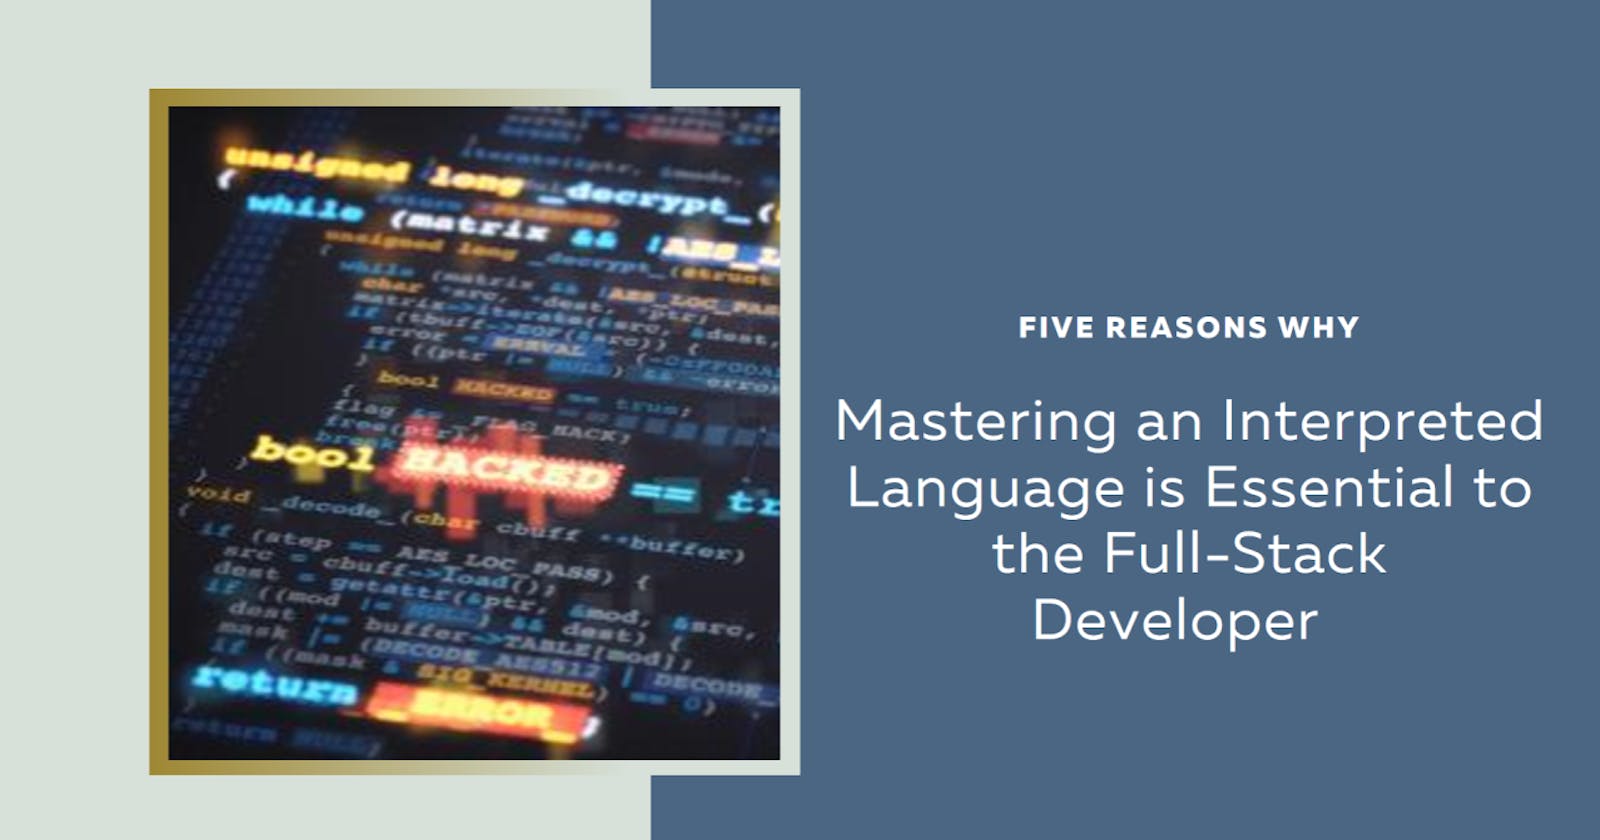 Top five reasons why mastering an interpreted language (like Python) is essential to the Full-Stack Developer